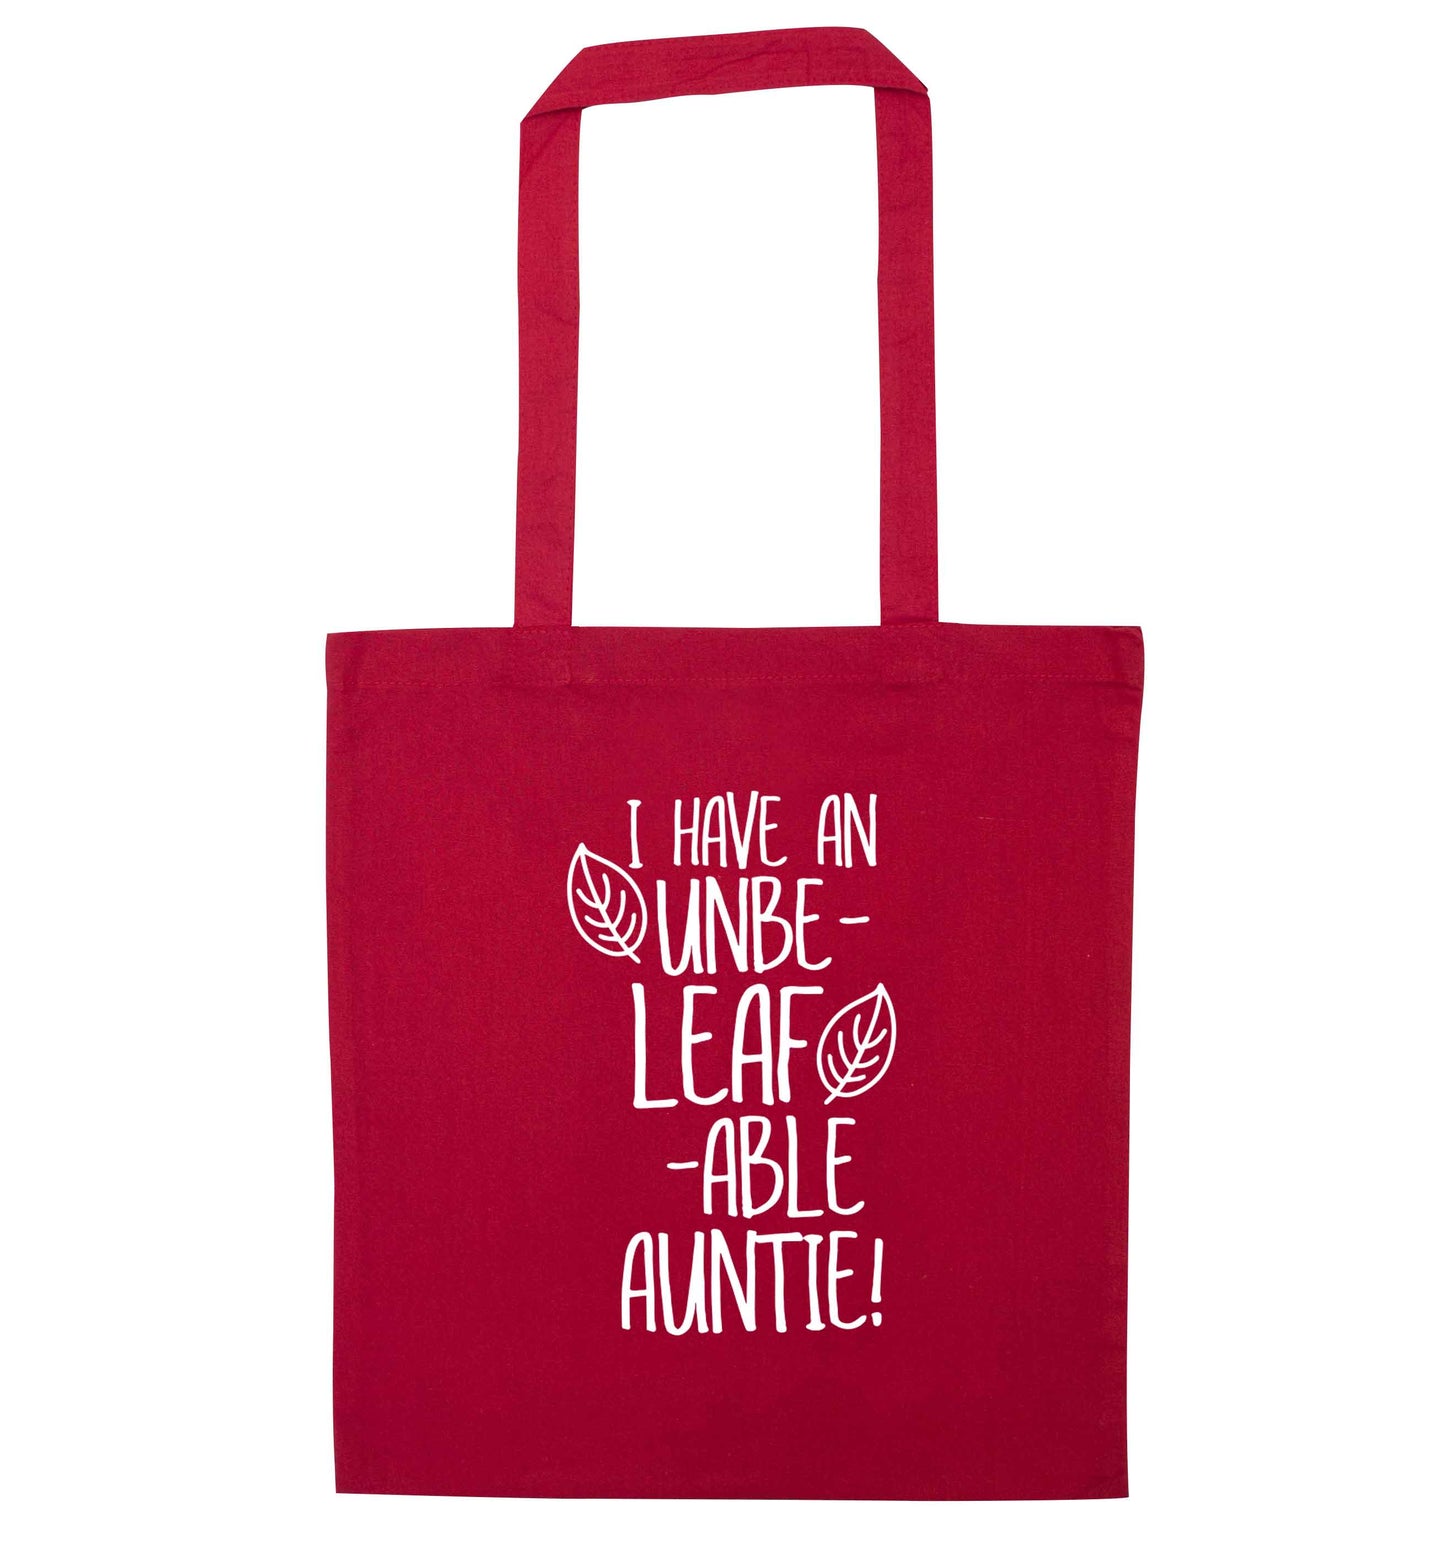 I have an unbe-leaf-able auntie red tote bag